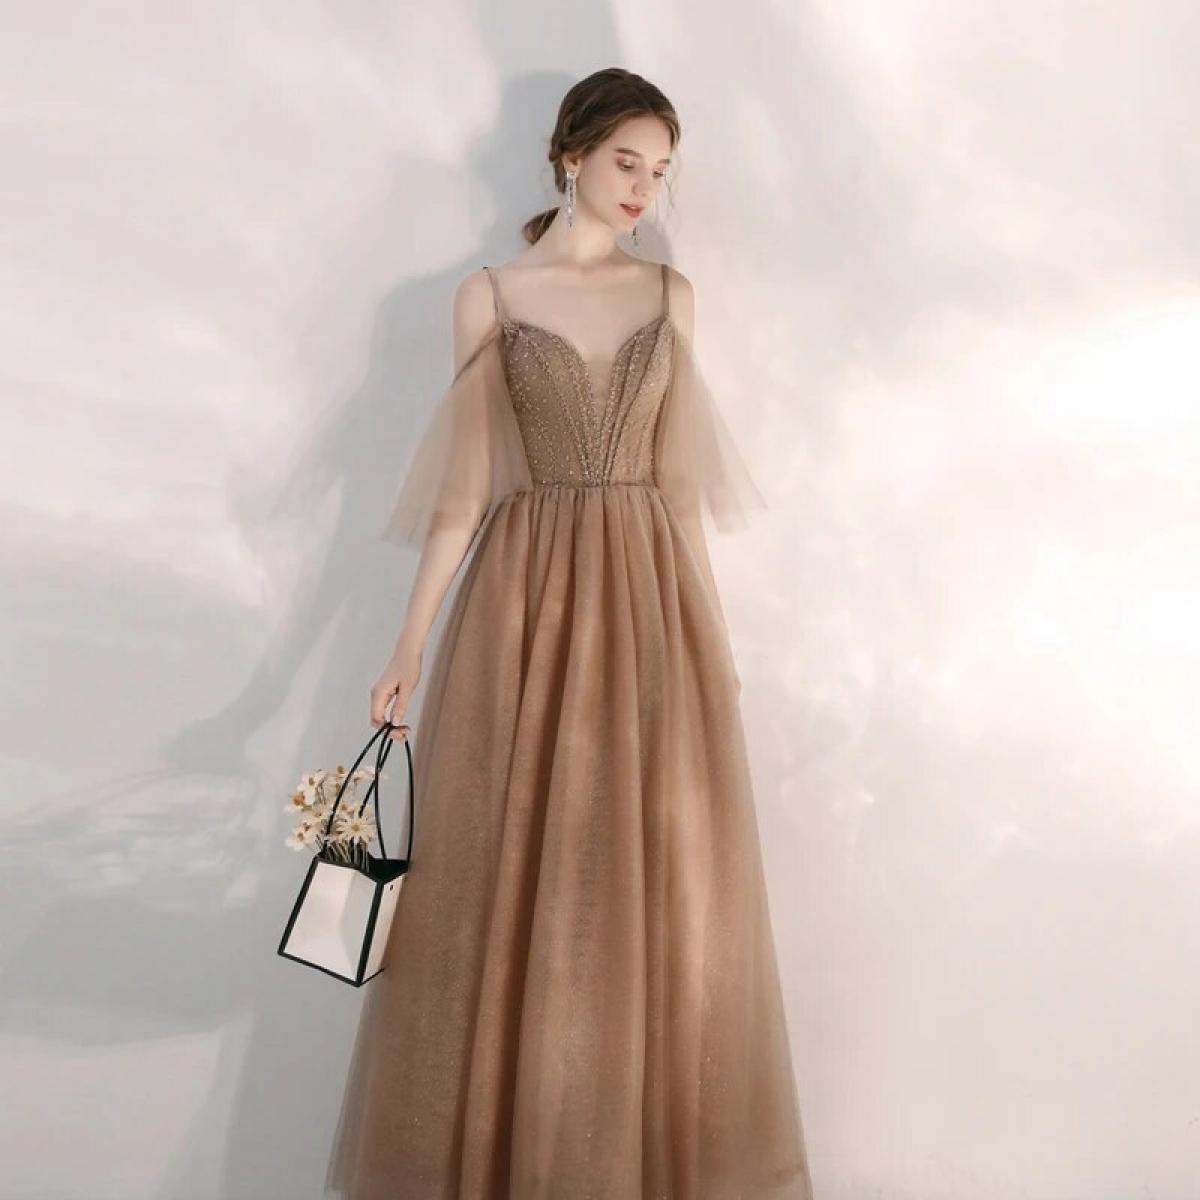 Long Luxury Evening Dresses For Day And Night Party Robe Bridesmaid Dress Woman Prom Gown Elegant Gowns Formal Suitable 